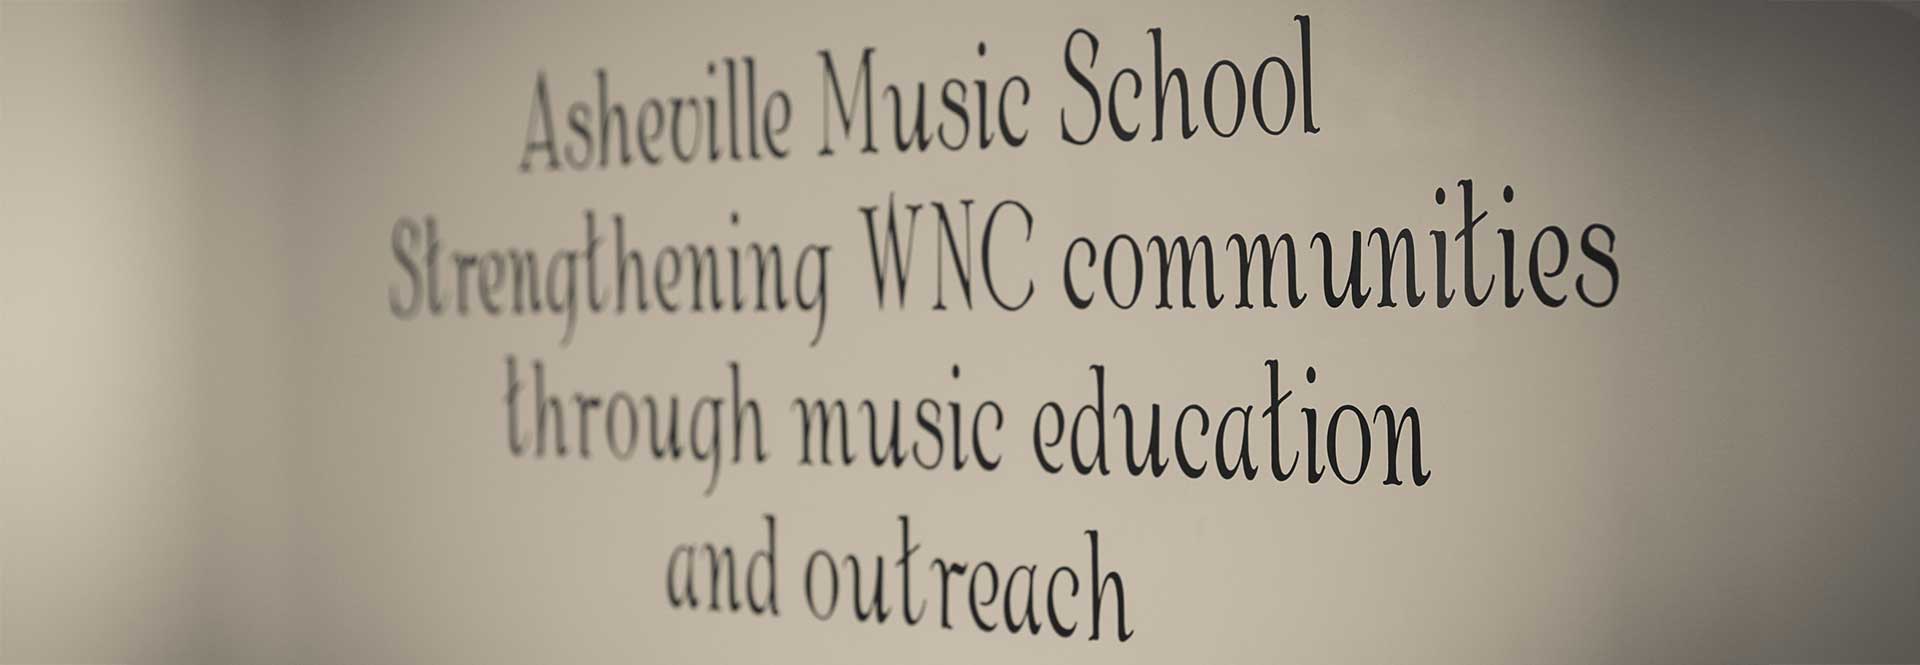 Asheville Music School Mission Statement on wall